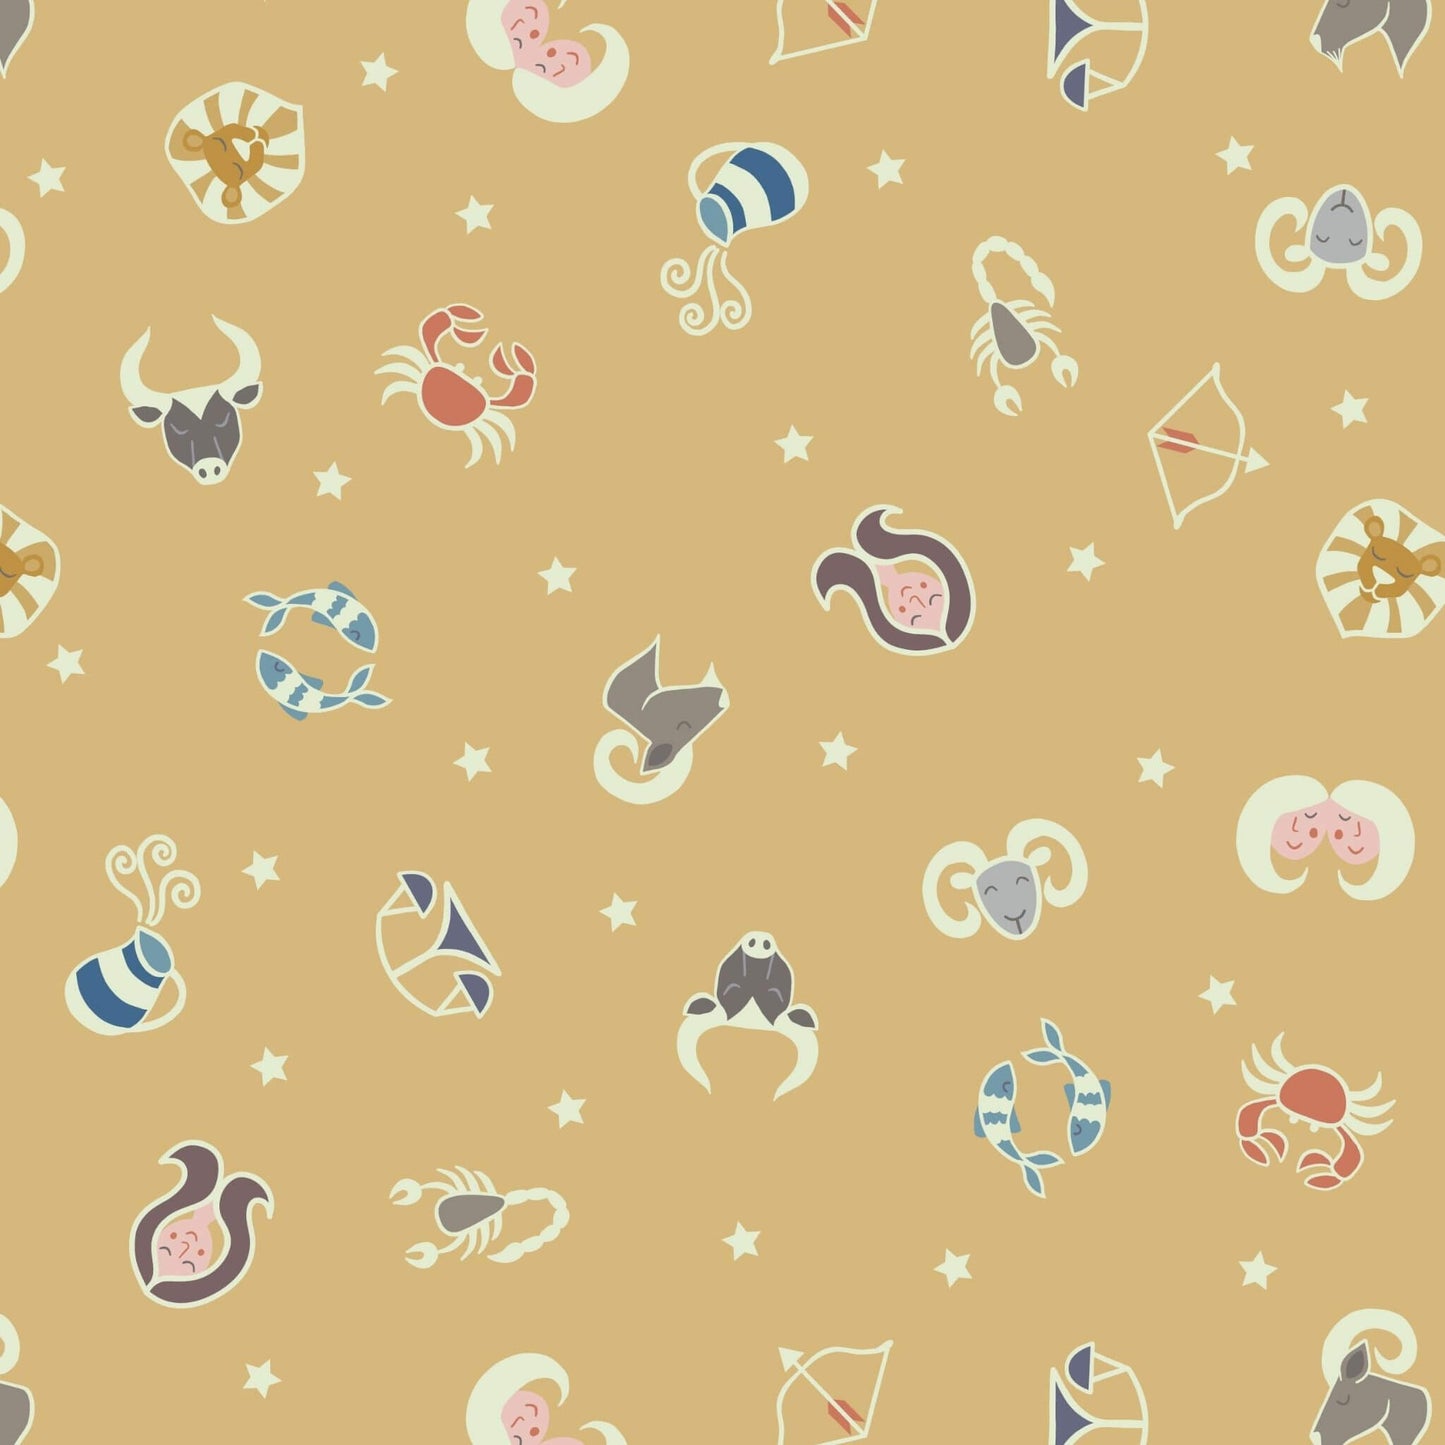 Star Signs - Small Things Glow Fabric Range - Lewis & Irene - Mellow Orche